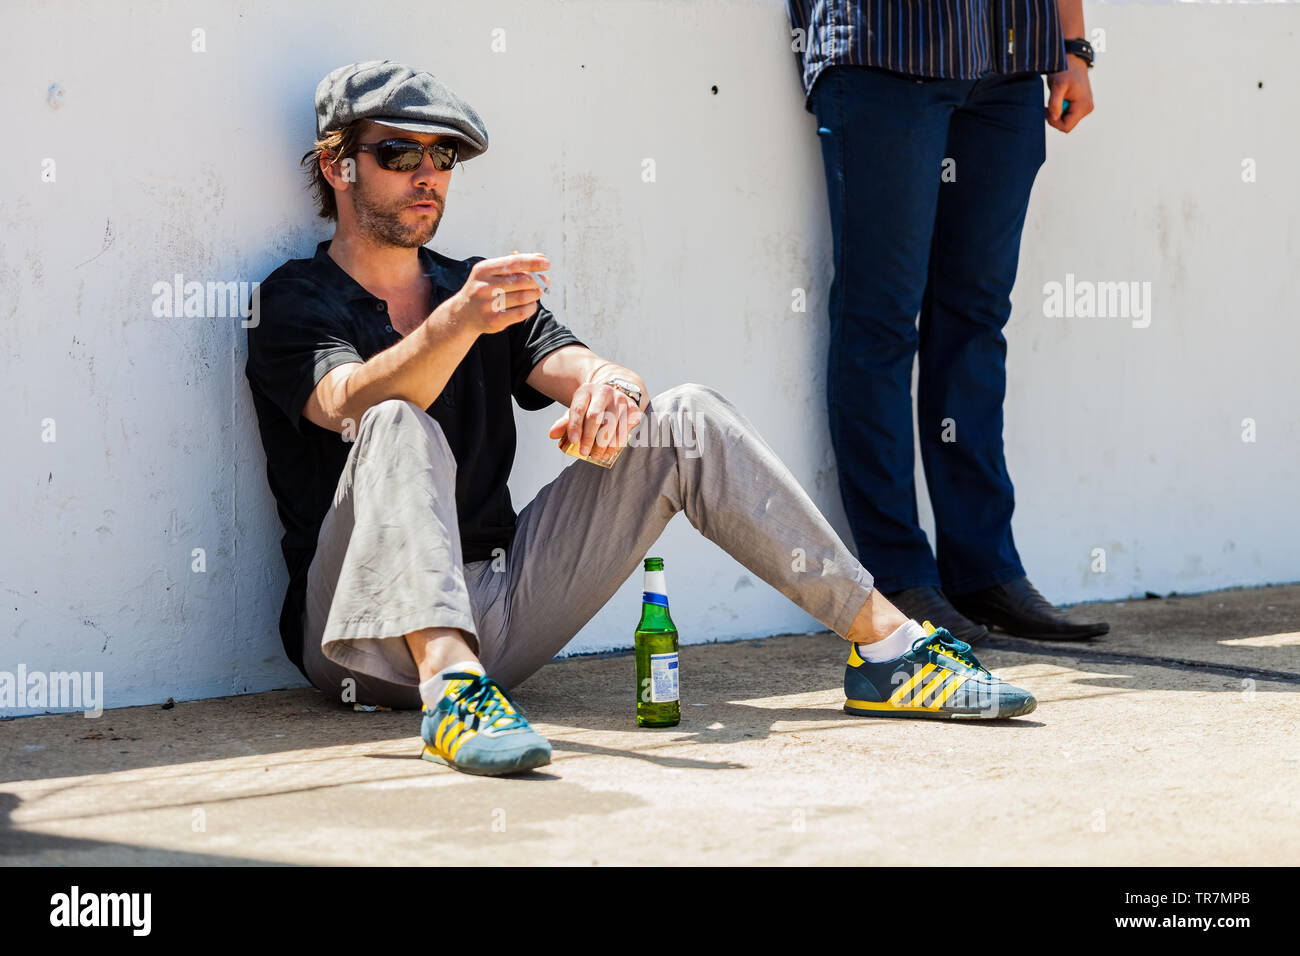 Johannesburg, South Africa - October 05 2013: Jay Kay of Jamiroquai  relaxing with a Cigarette next to a race track Stock Photo - Alamy